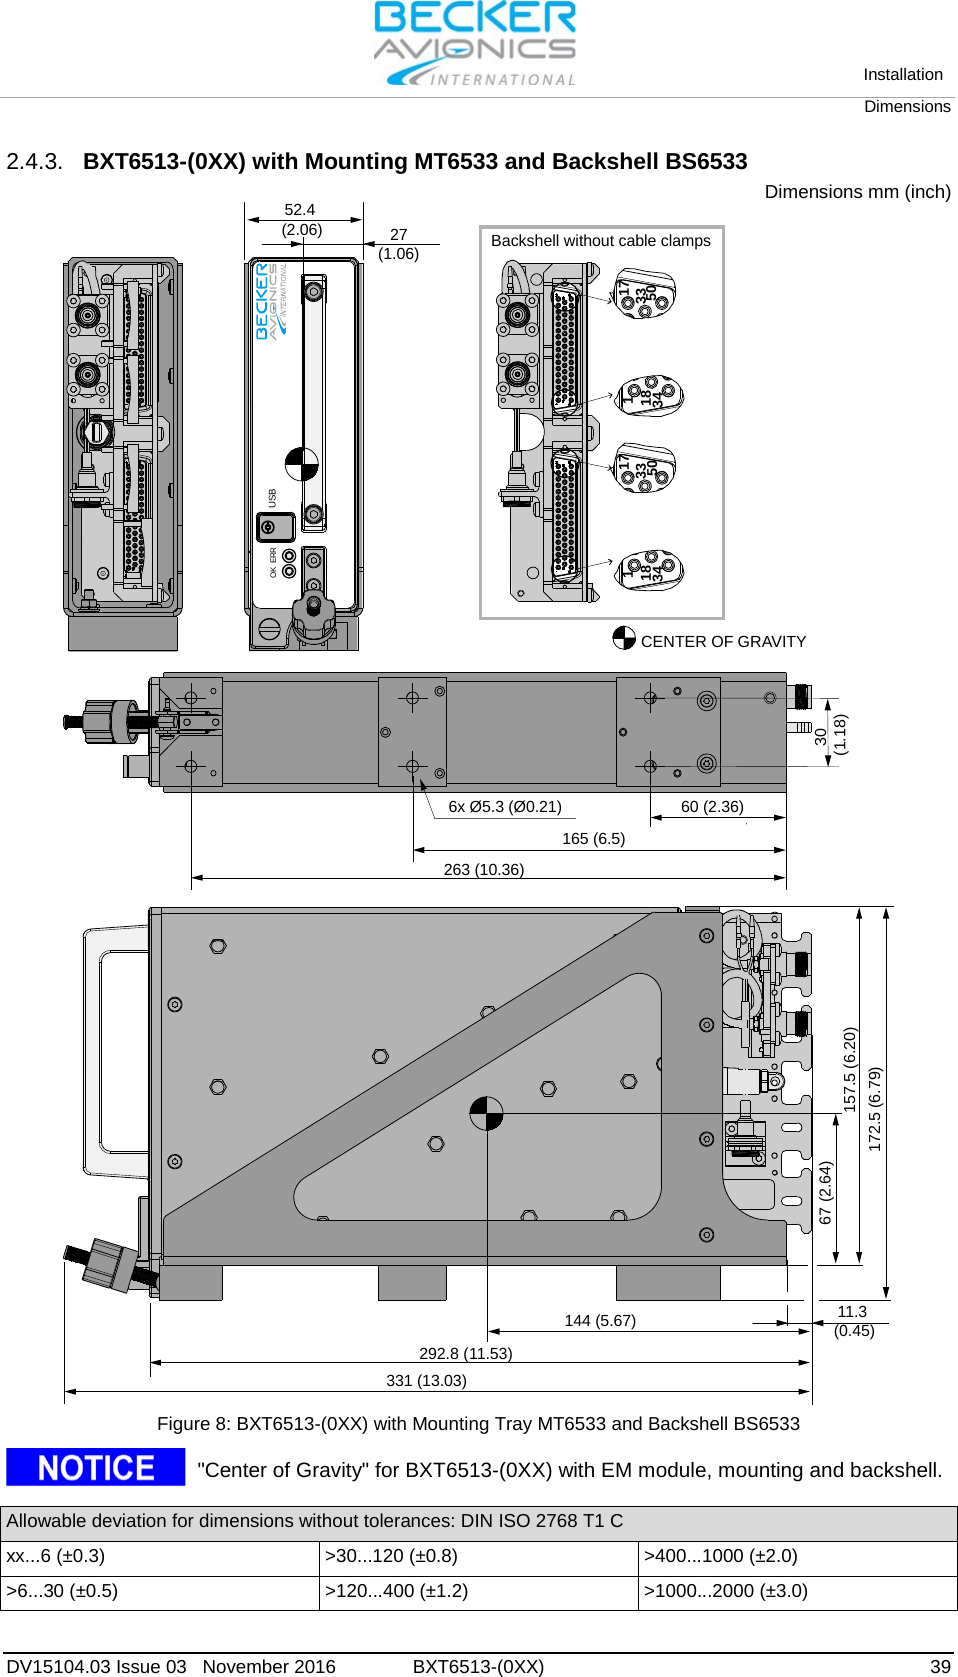   Installation Dimensions  DV15104.03 Issue 03   November 2016 BXT6513-(0XX)  39 2.4.3. BXT6513-(0XX) with Mounting MT6533 and Backshell BS6533 Dimensions mm (inch) USBOK ERRCENTER OF GRAVITY263 (10.36)67 (2.64)172.5 (6.79)157.5 (6.20)292.8 (11.53)331 (13.03)144 (5.67) 11.3(0.45)165 (6.5)30(1.18)60 (2.36)6x Ø5.3 (Ø0.21)52.4(2.06) 27(1.06) Backshell without cable clamps1733501183417335011834 Figure 8: BXT6513-(0XX) with Mounting Tray MT6533 and Backshell BS6533   &quot;Center of Gravity&quot; for BXT6513-(0XX) with EM module, mounting and backshell.  Allowable deviation for dimensions without tolerances: DIN ISO 2768 T1 C xx...6 (±0.3) &gt;30...120 (±0.8) &gt;400...1000 (±2.0) &gt;6...30 (±0.5) &gt;120...400 (±1.2) &gt;1000...2000 (±3.0)    